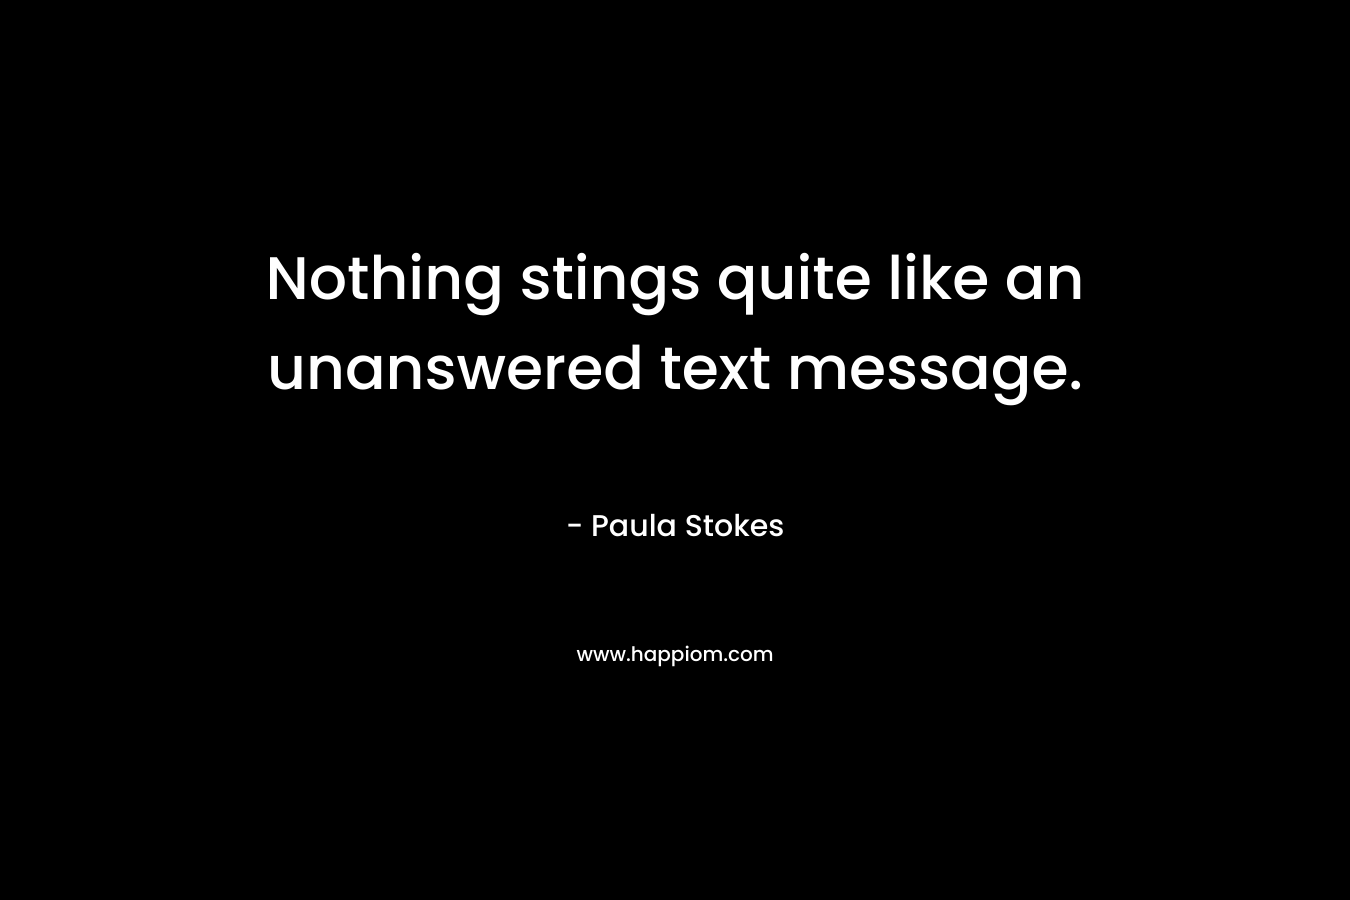 Nothing stings quite like an unanswered text message. – Paula Stokes